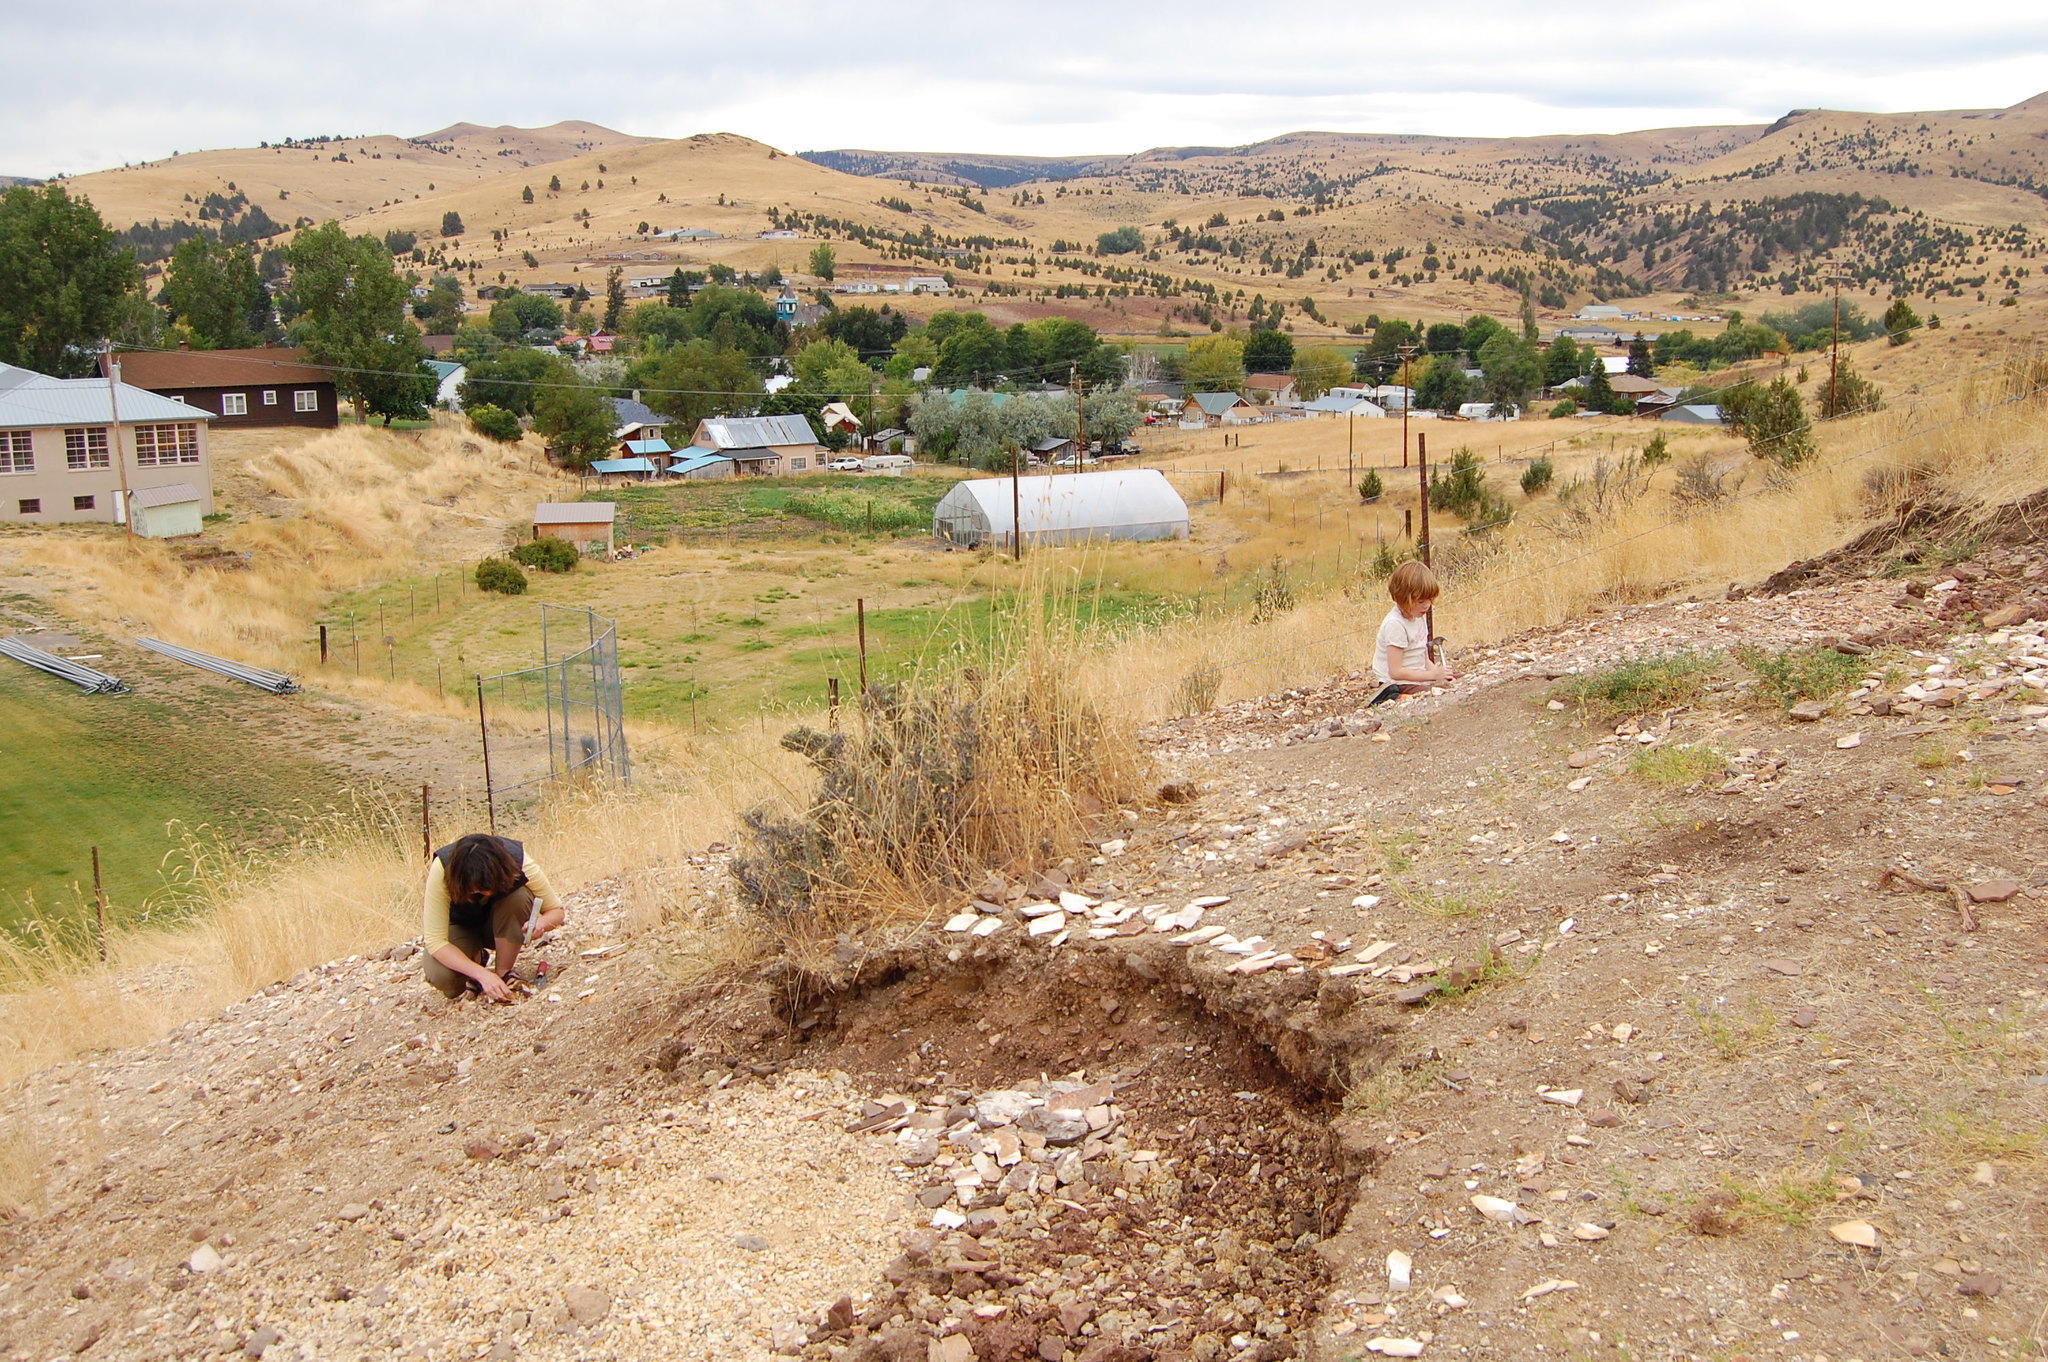 Dig Up Your Own 30 Million Year Old Fossils At This Oregon Park